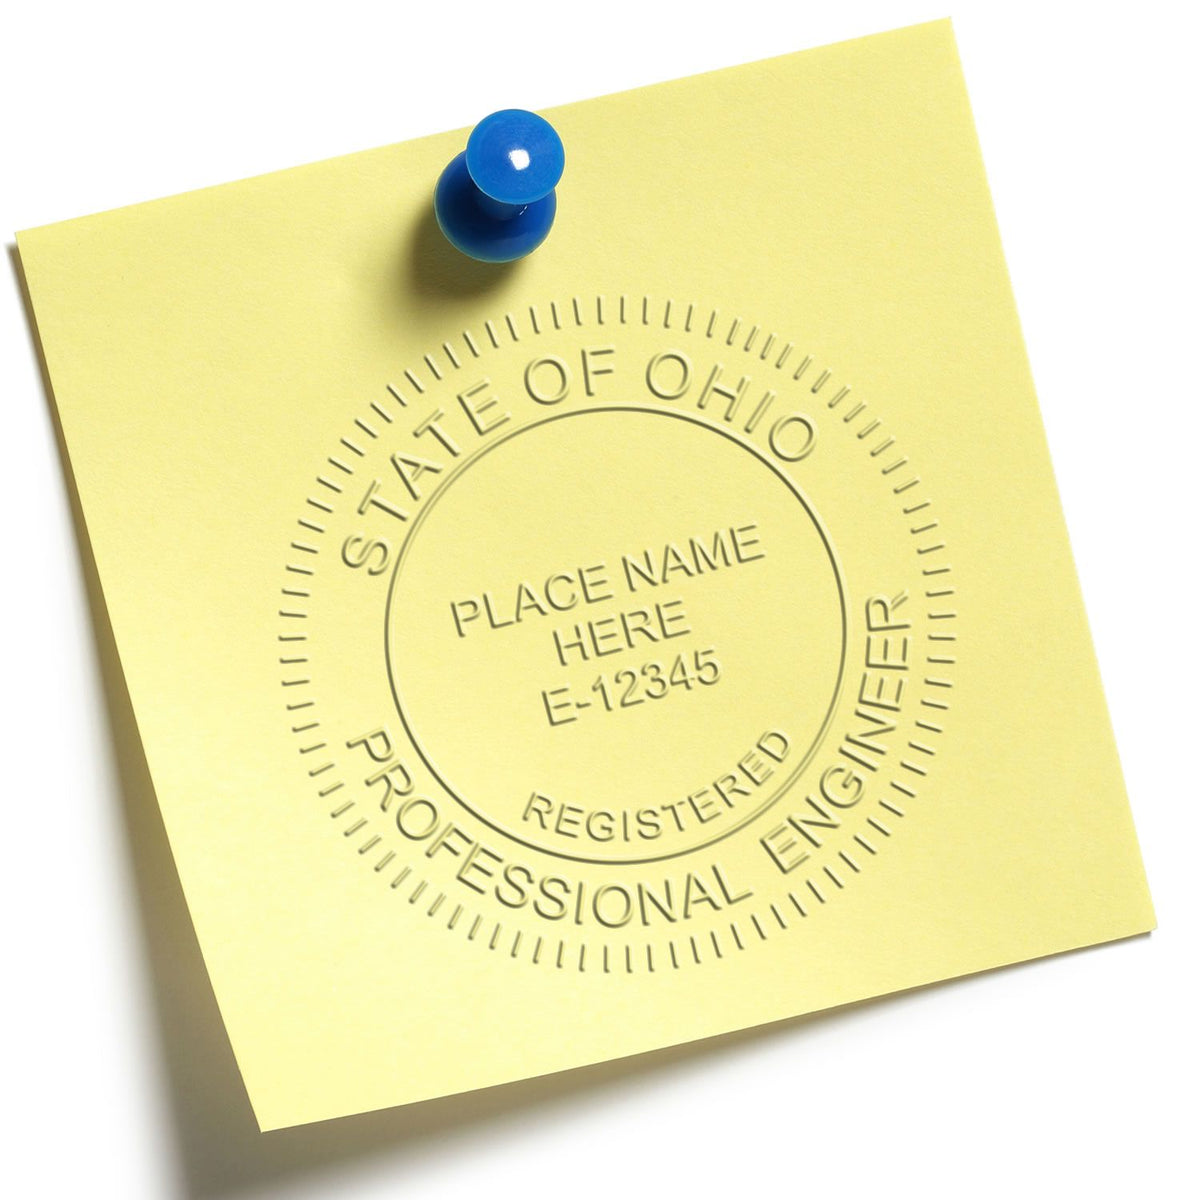 An alternative view of the Hybrid Ohio Engineer Seal stamped on a sheet of paper showing the image in use